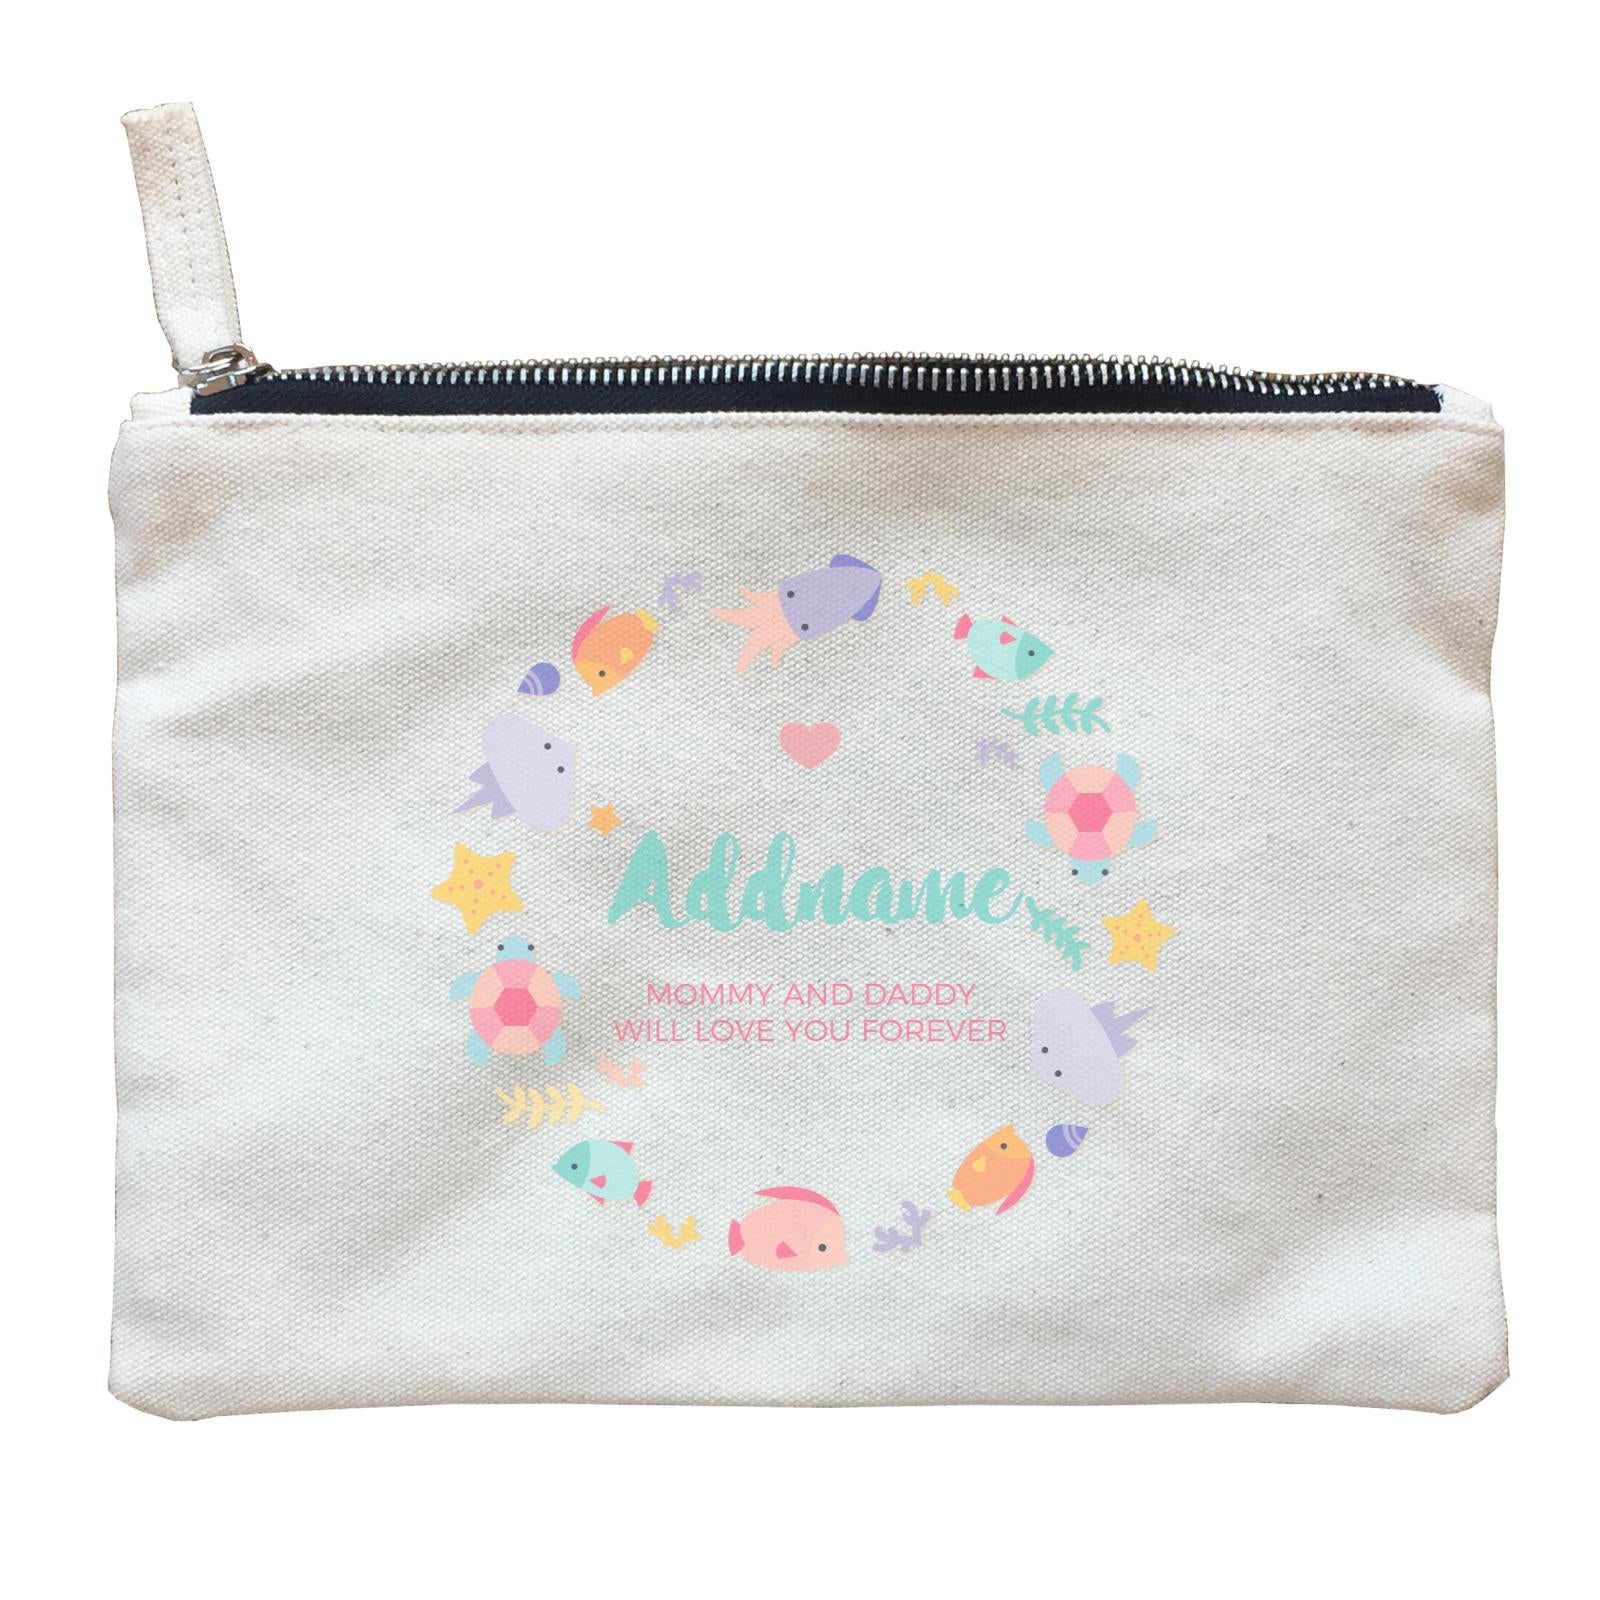 Cute Sea Creatures with Elements Personalizable with Name and Text Zipper Pouch